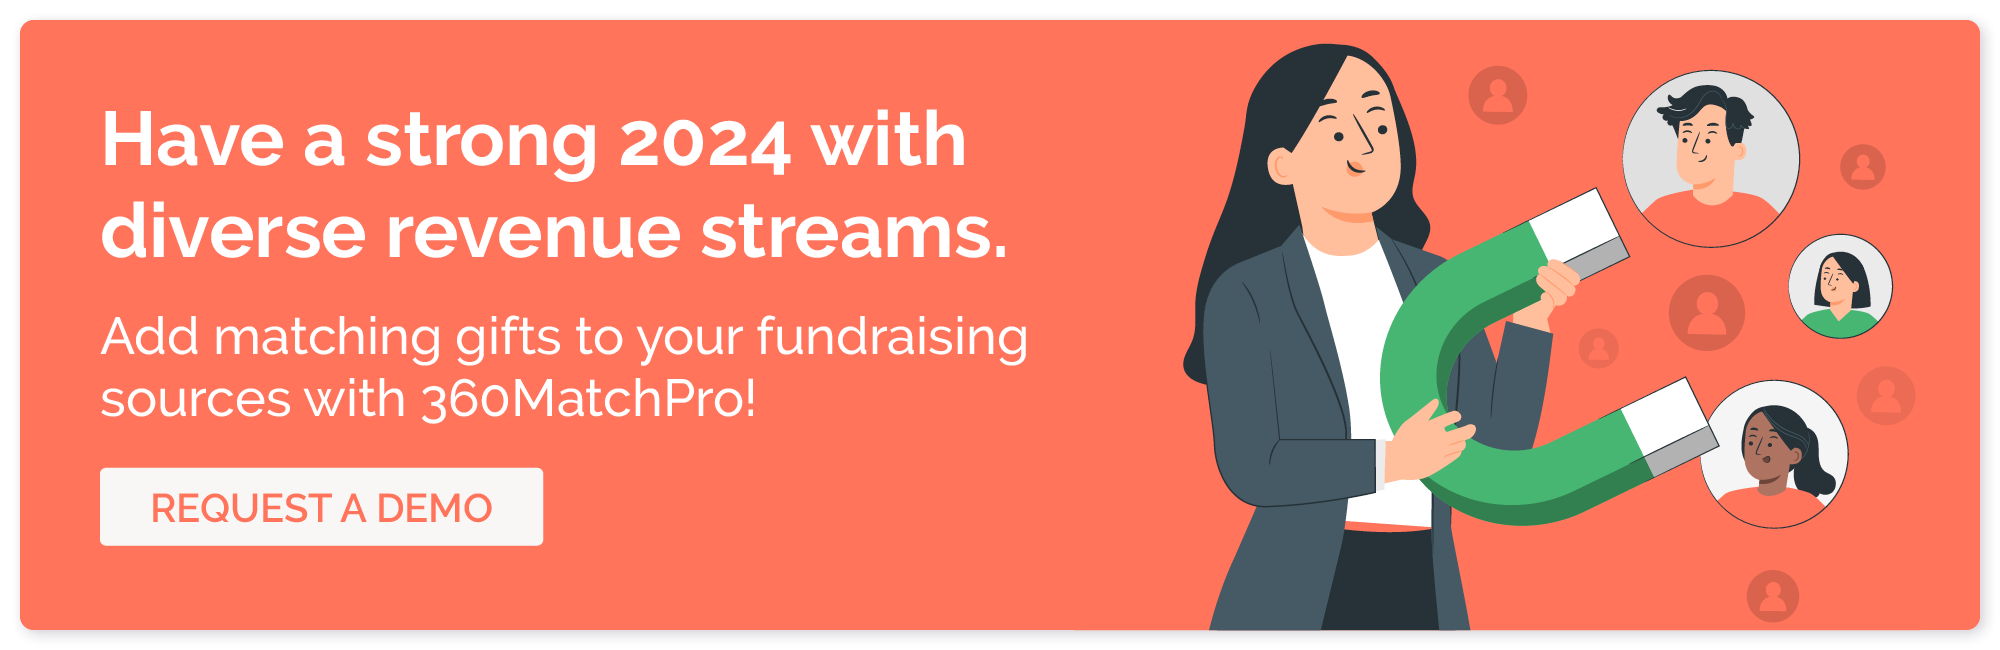 Have a strong 2024 with diverse revenue sources. Add matching gifts to your fundraising sources with 360MatchPro! Request a demo.